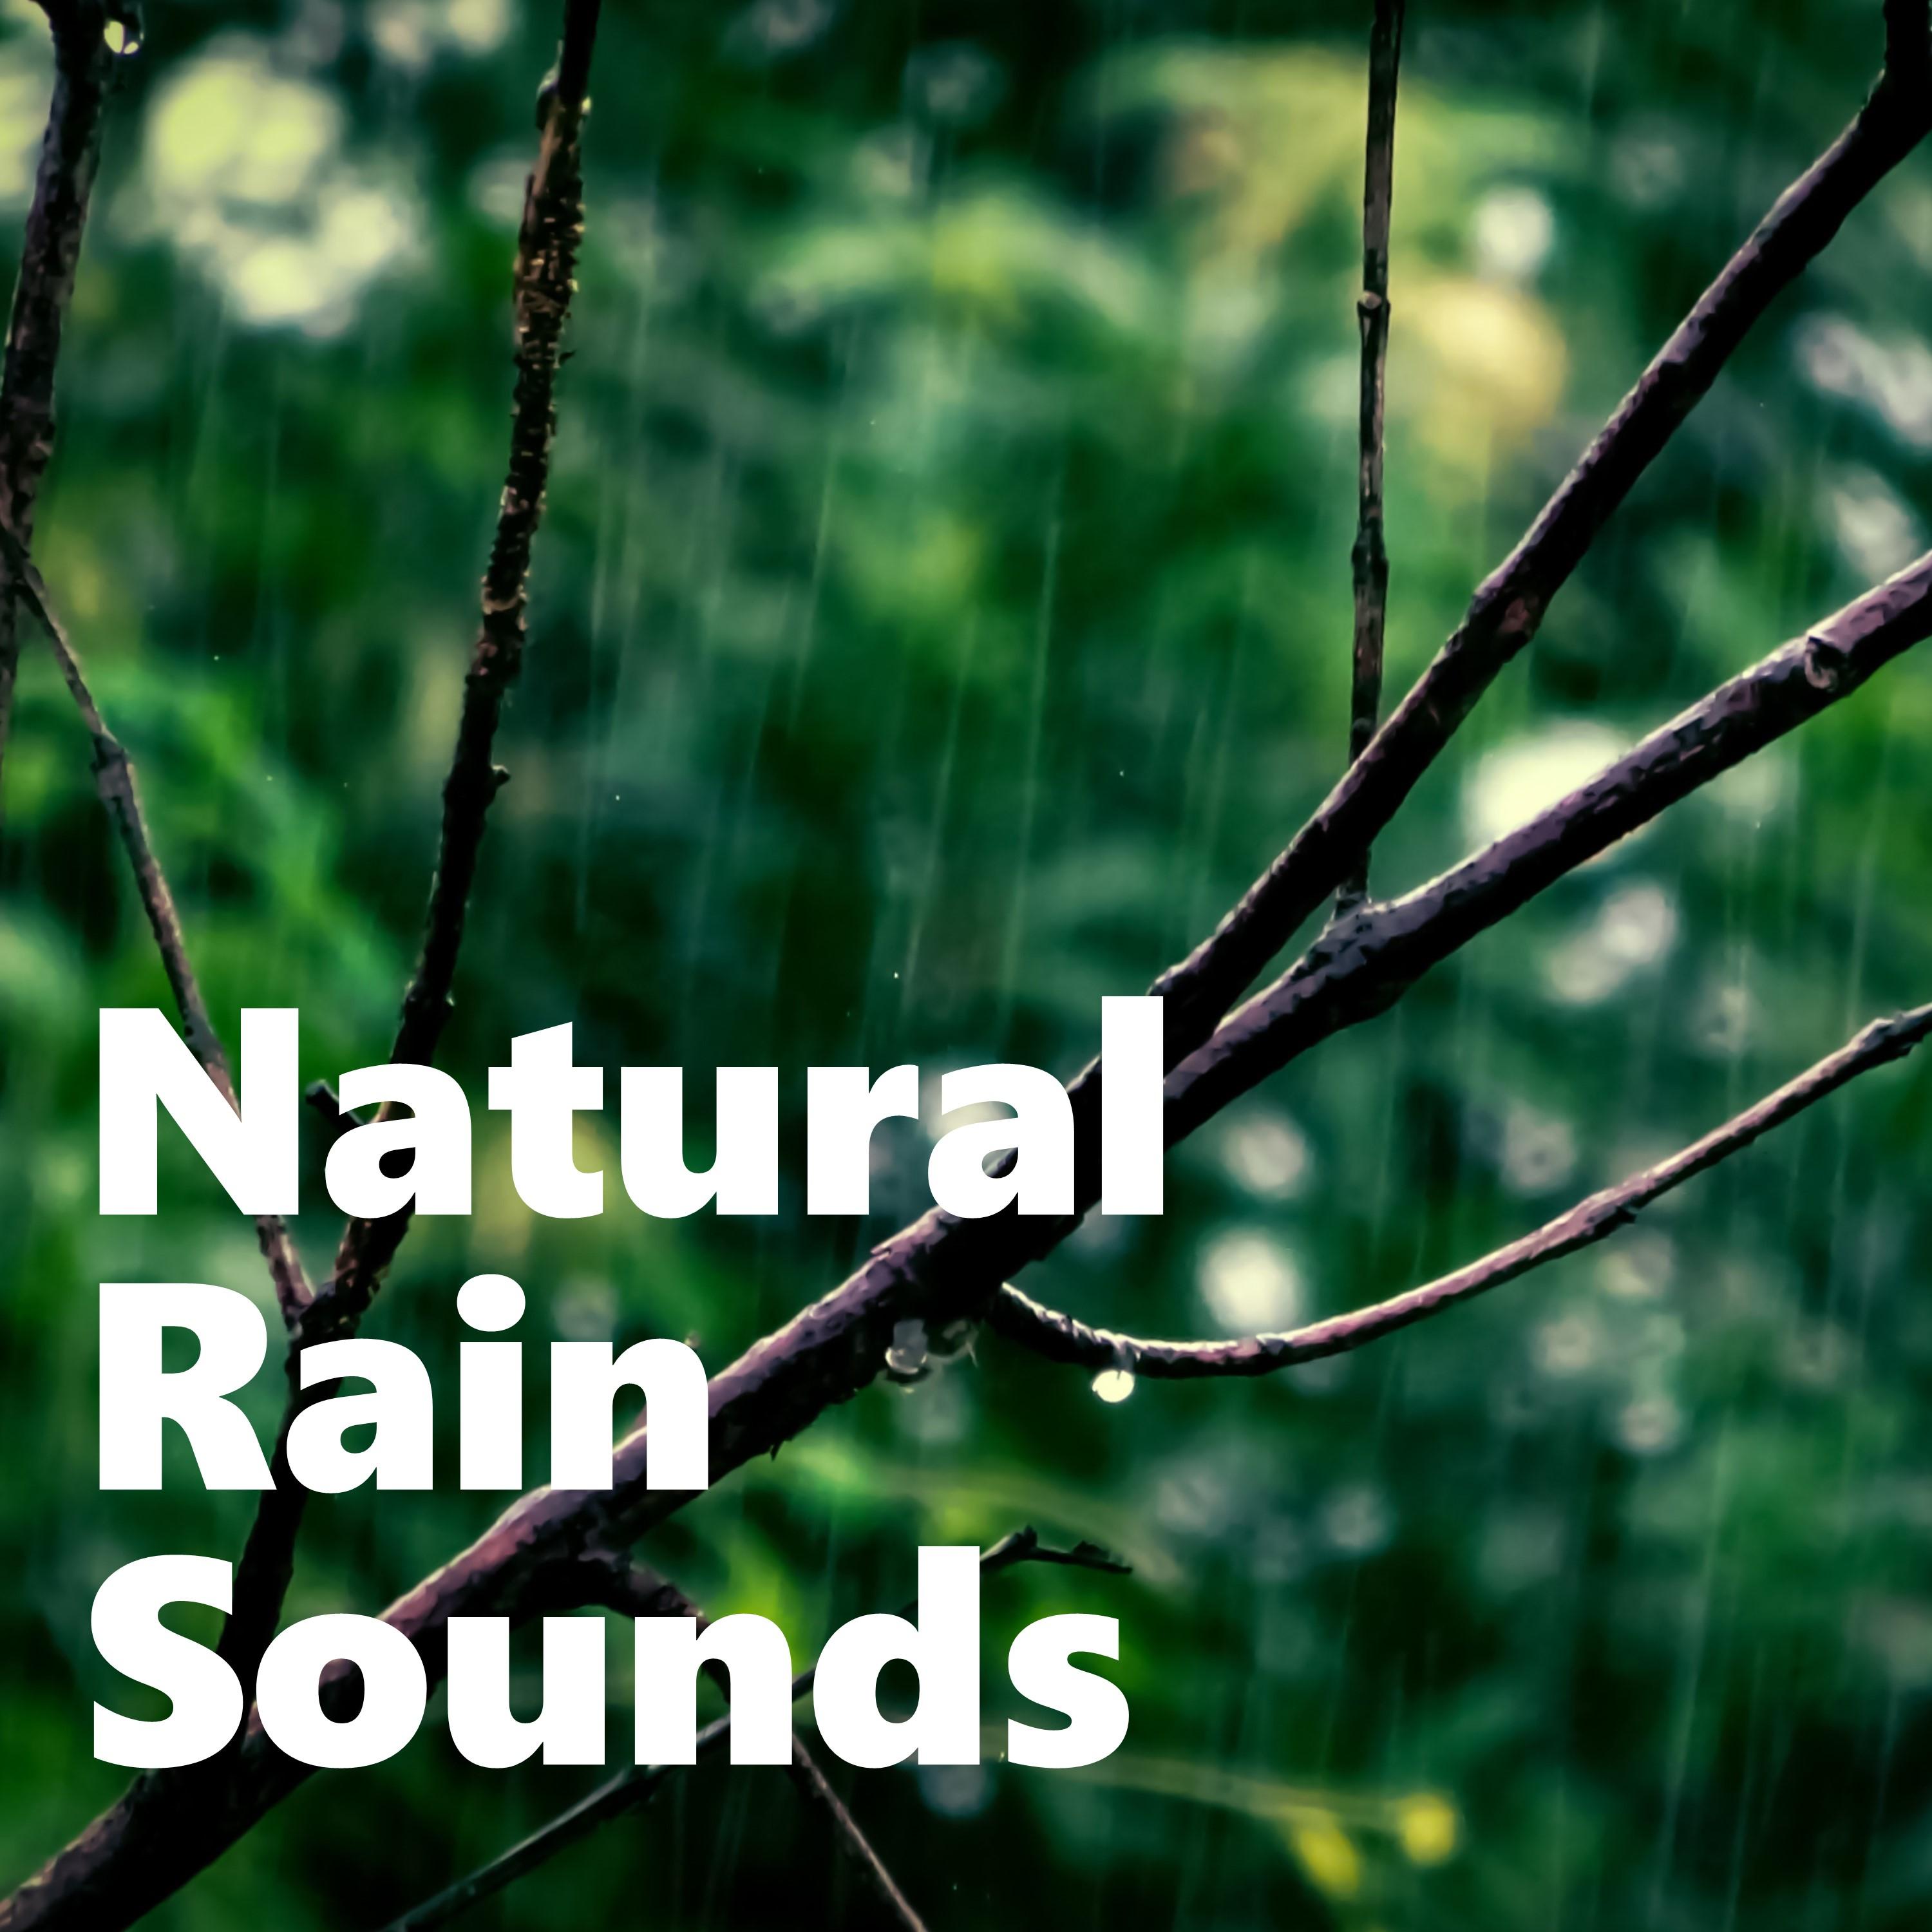 11 Real Rain and Nature Sounds, White Noise Music and Spa Relaxation